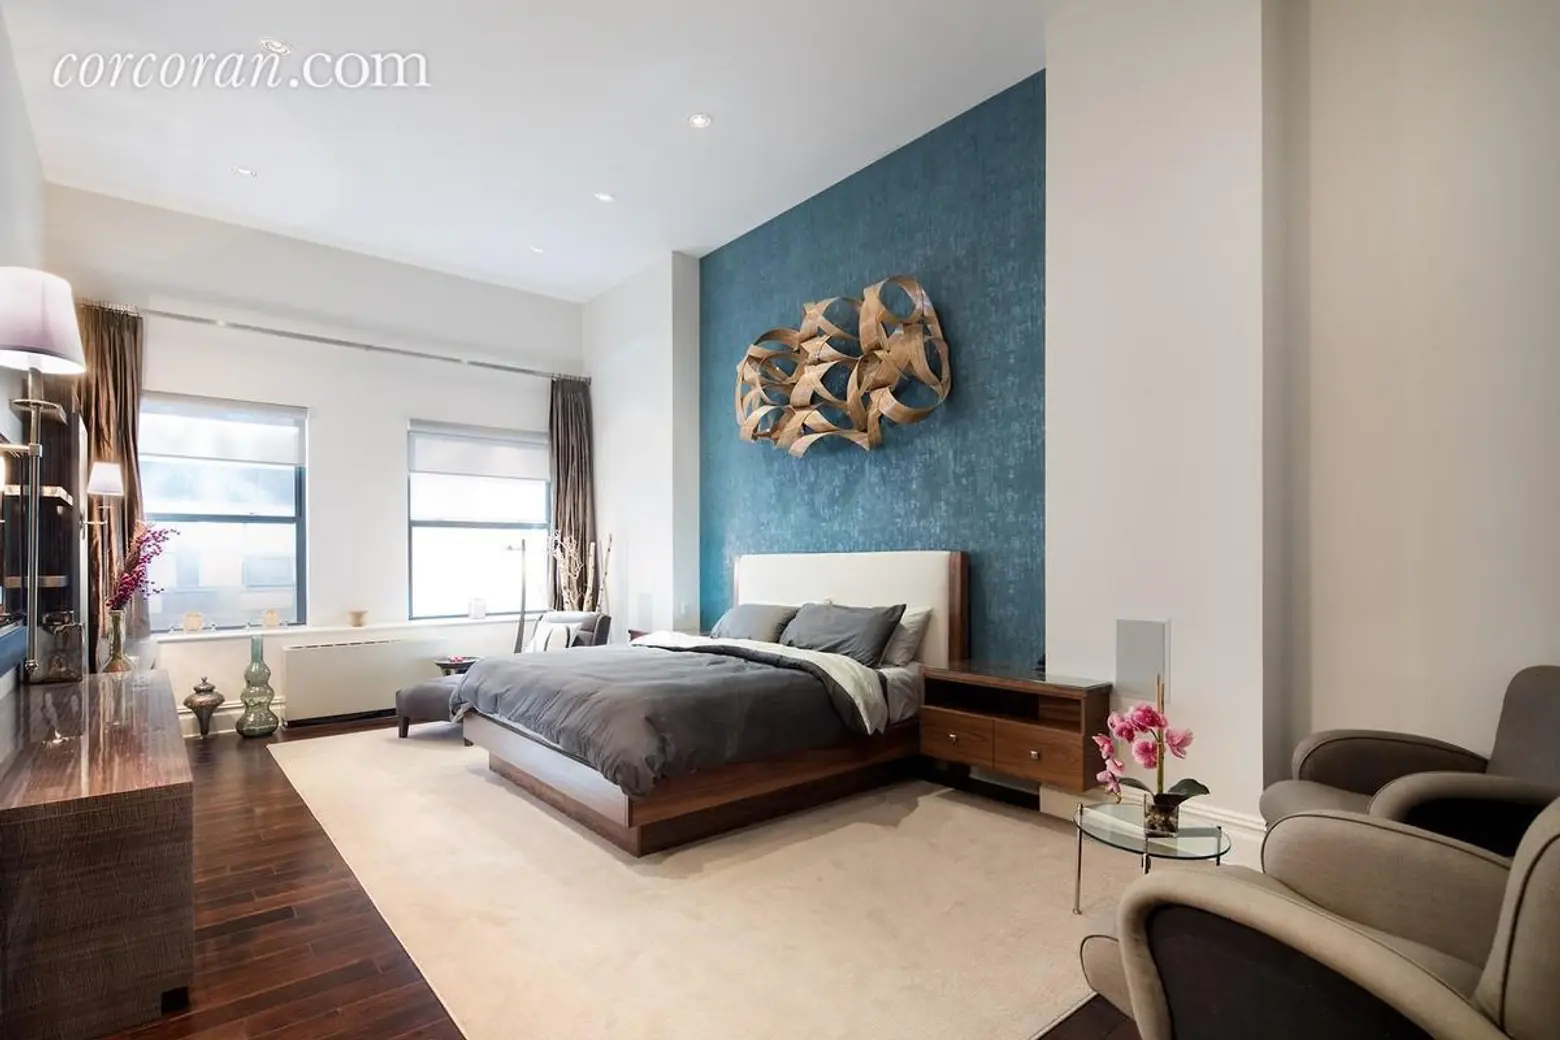 65 West 13th Street, Greenwich Village, celebrities, Shepard Smith, cool listings, condos